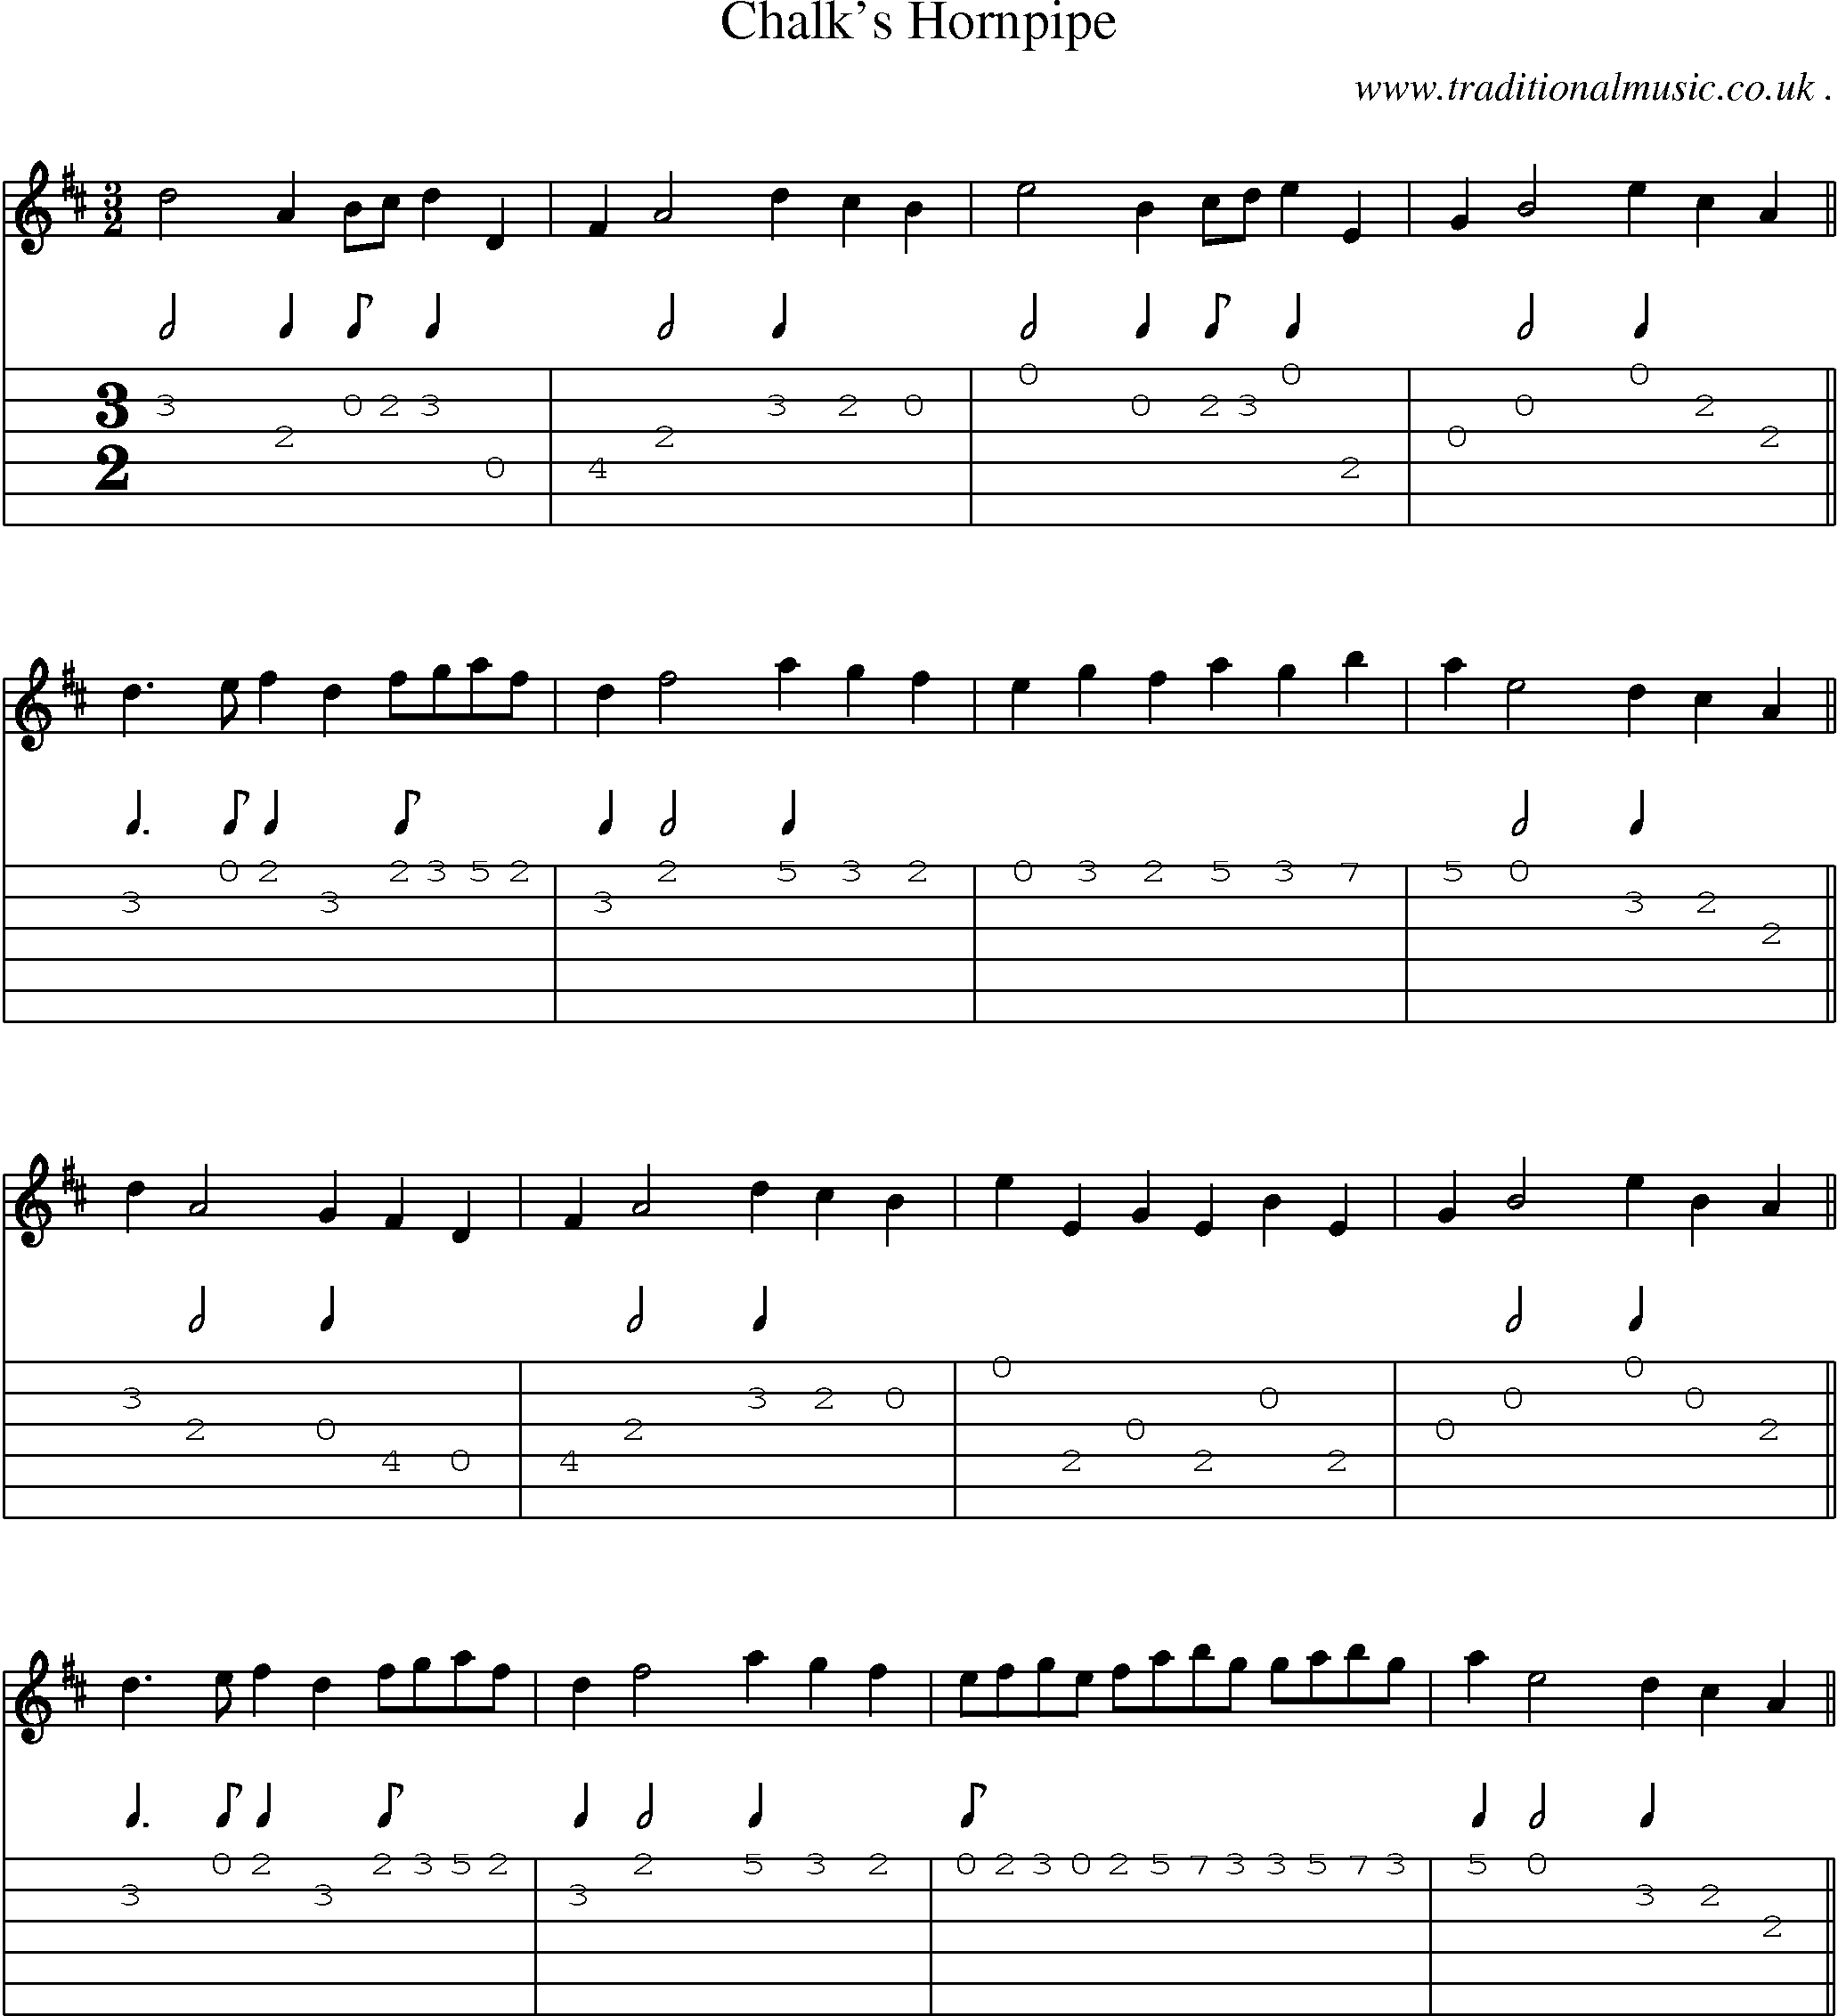 Sheet-Music and Guitar Tabs for Chalks Hornpipe